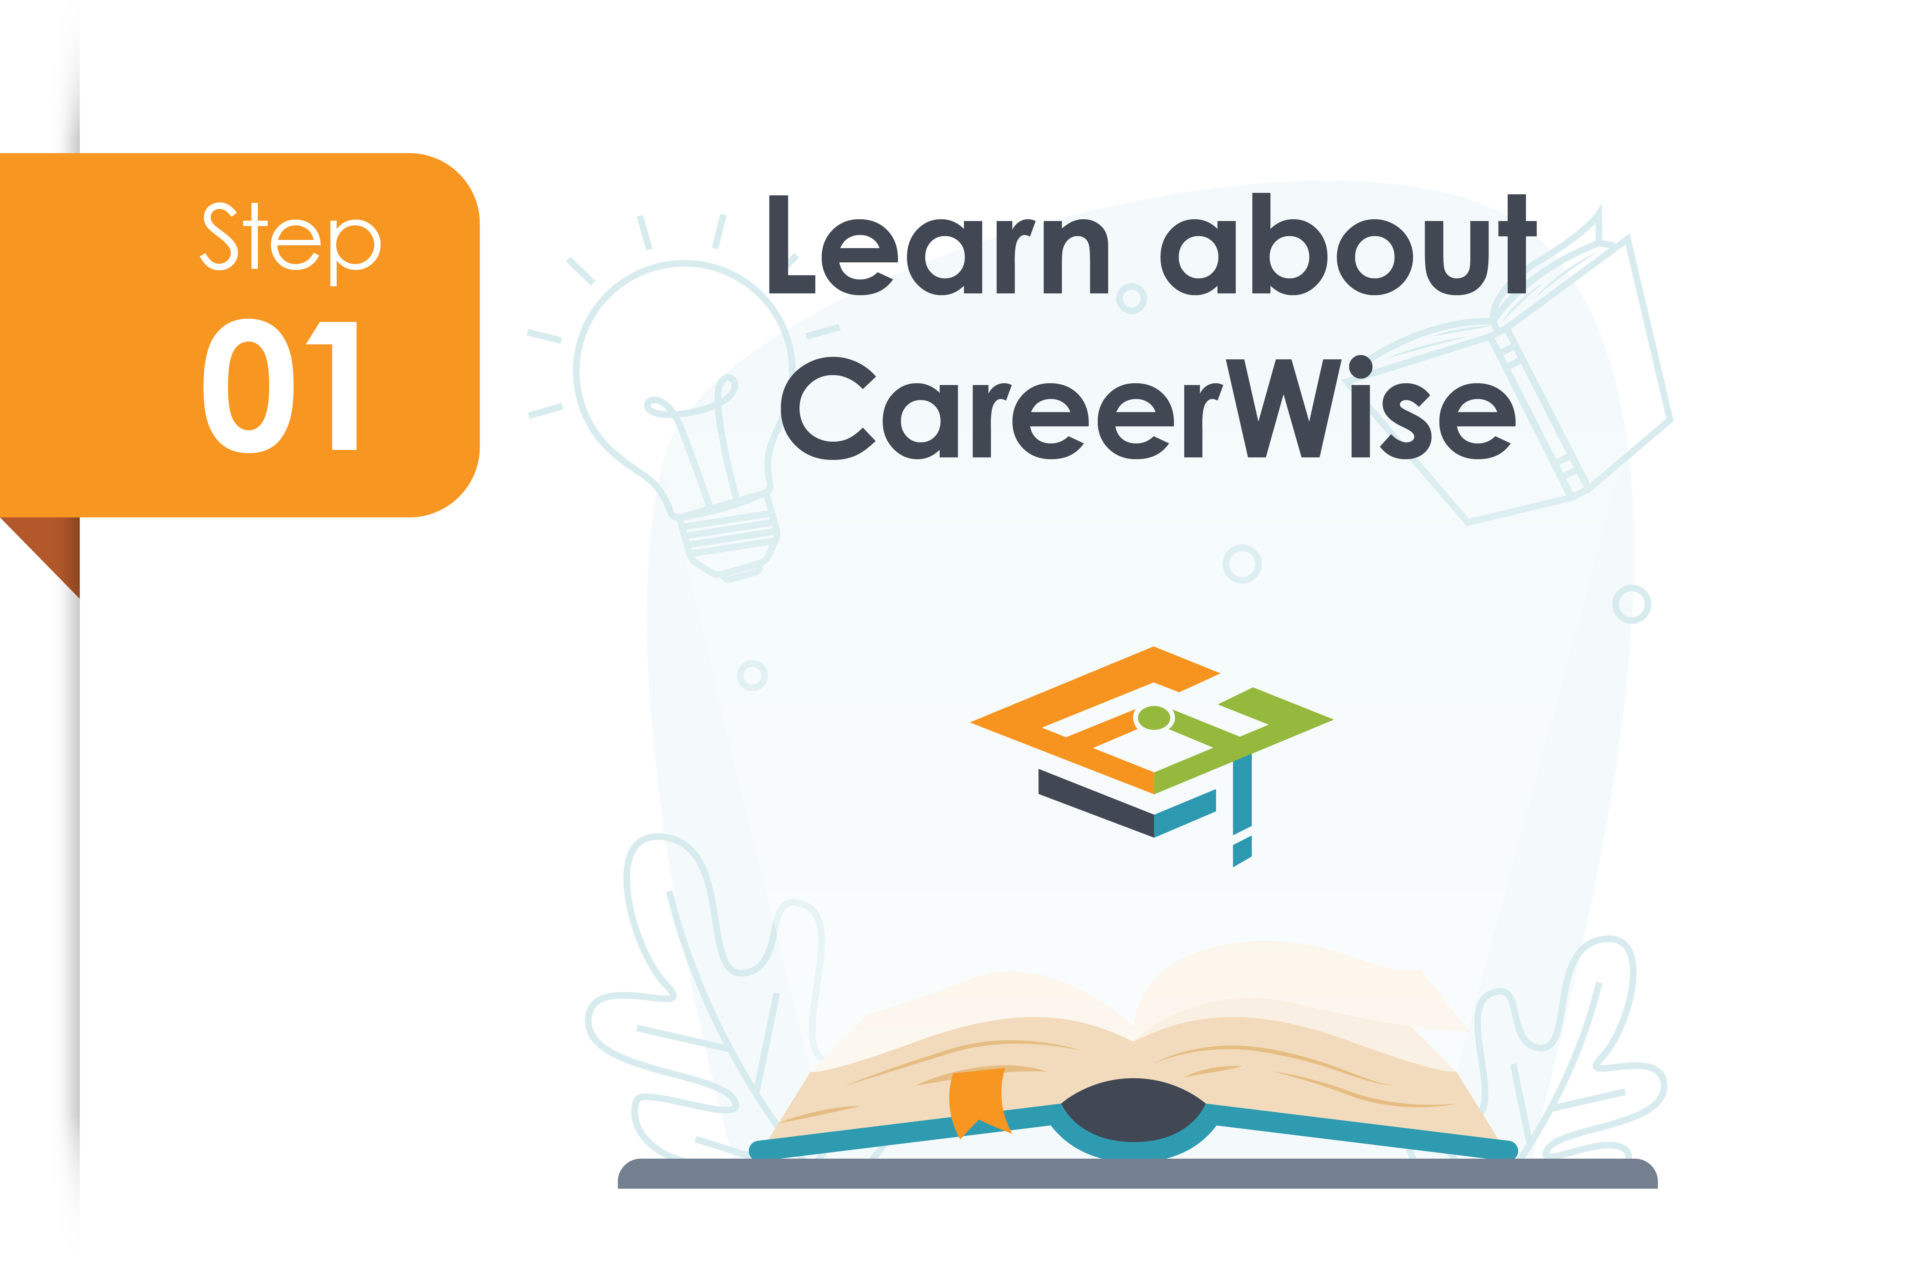 Step 1: Learn about CareerWise